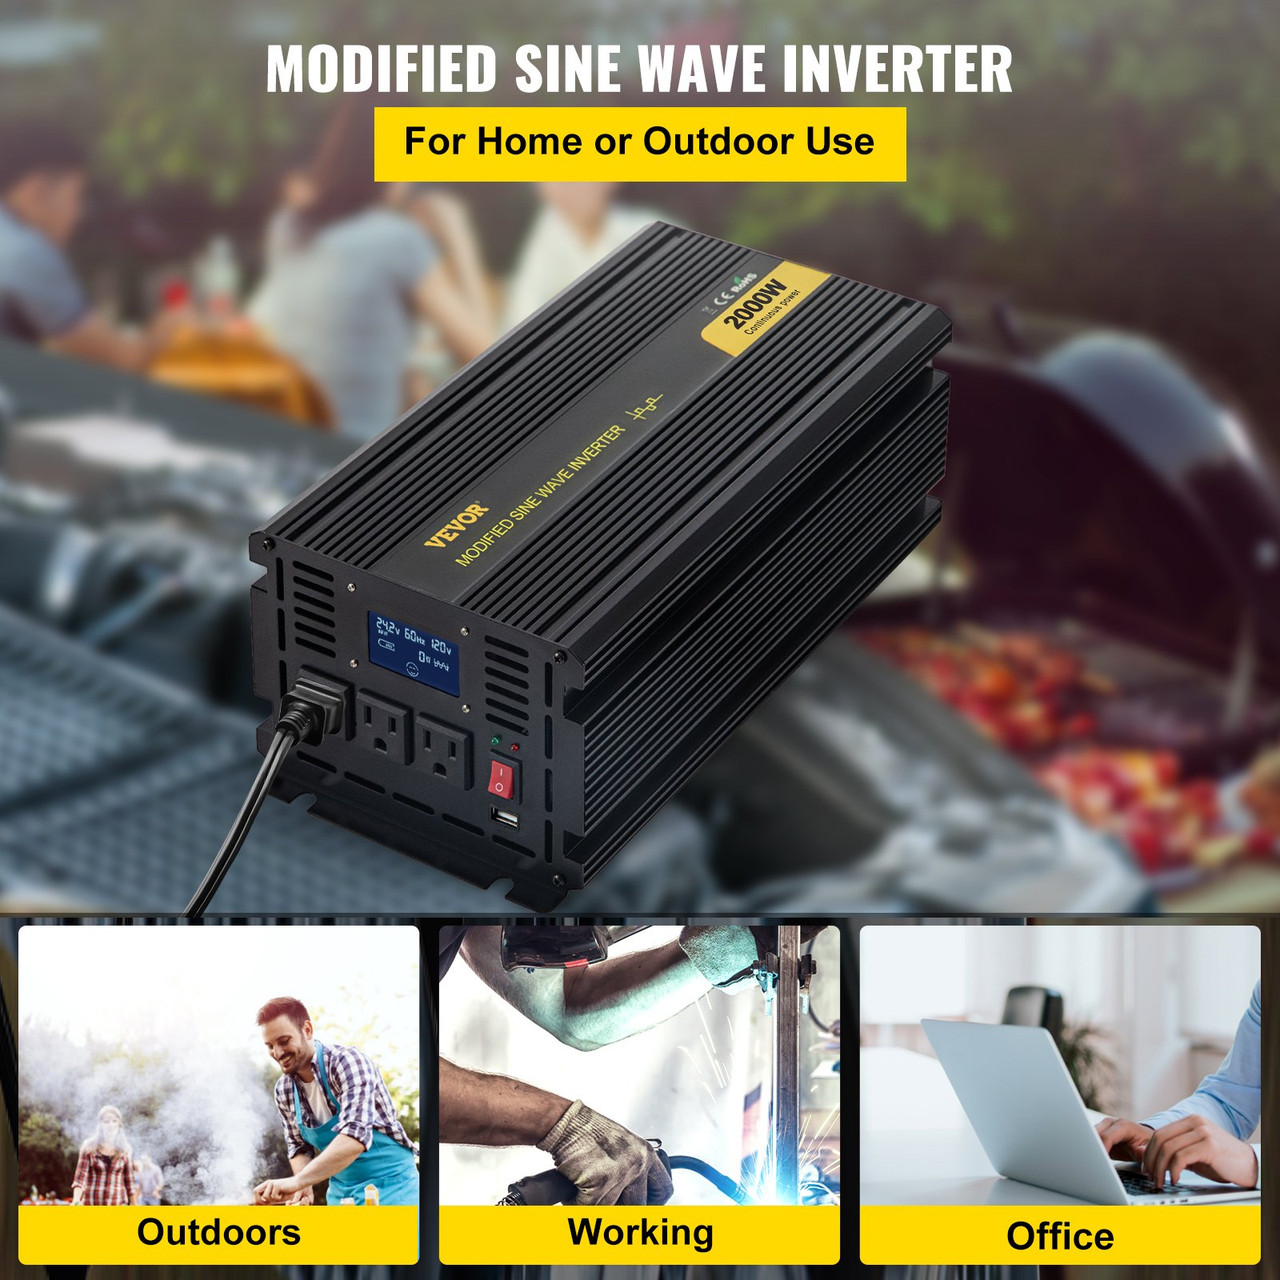 Power Inverter, 2000W Modified Sine Wave Inverter, DC 12V to AC 120V Car Converter, with LCD Display, Remote Controller, LED Indicator, AC Outlets Inverter for Truck RV Car Boat Travel Camping